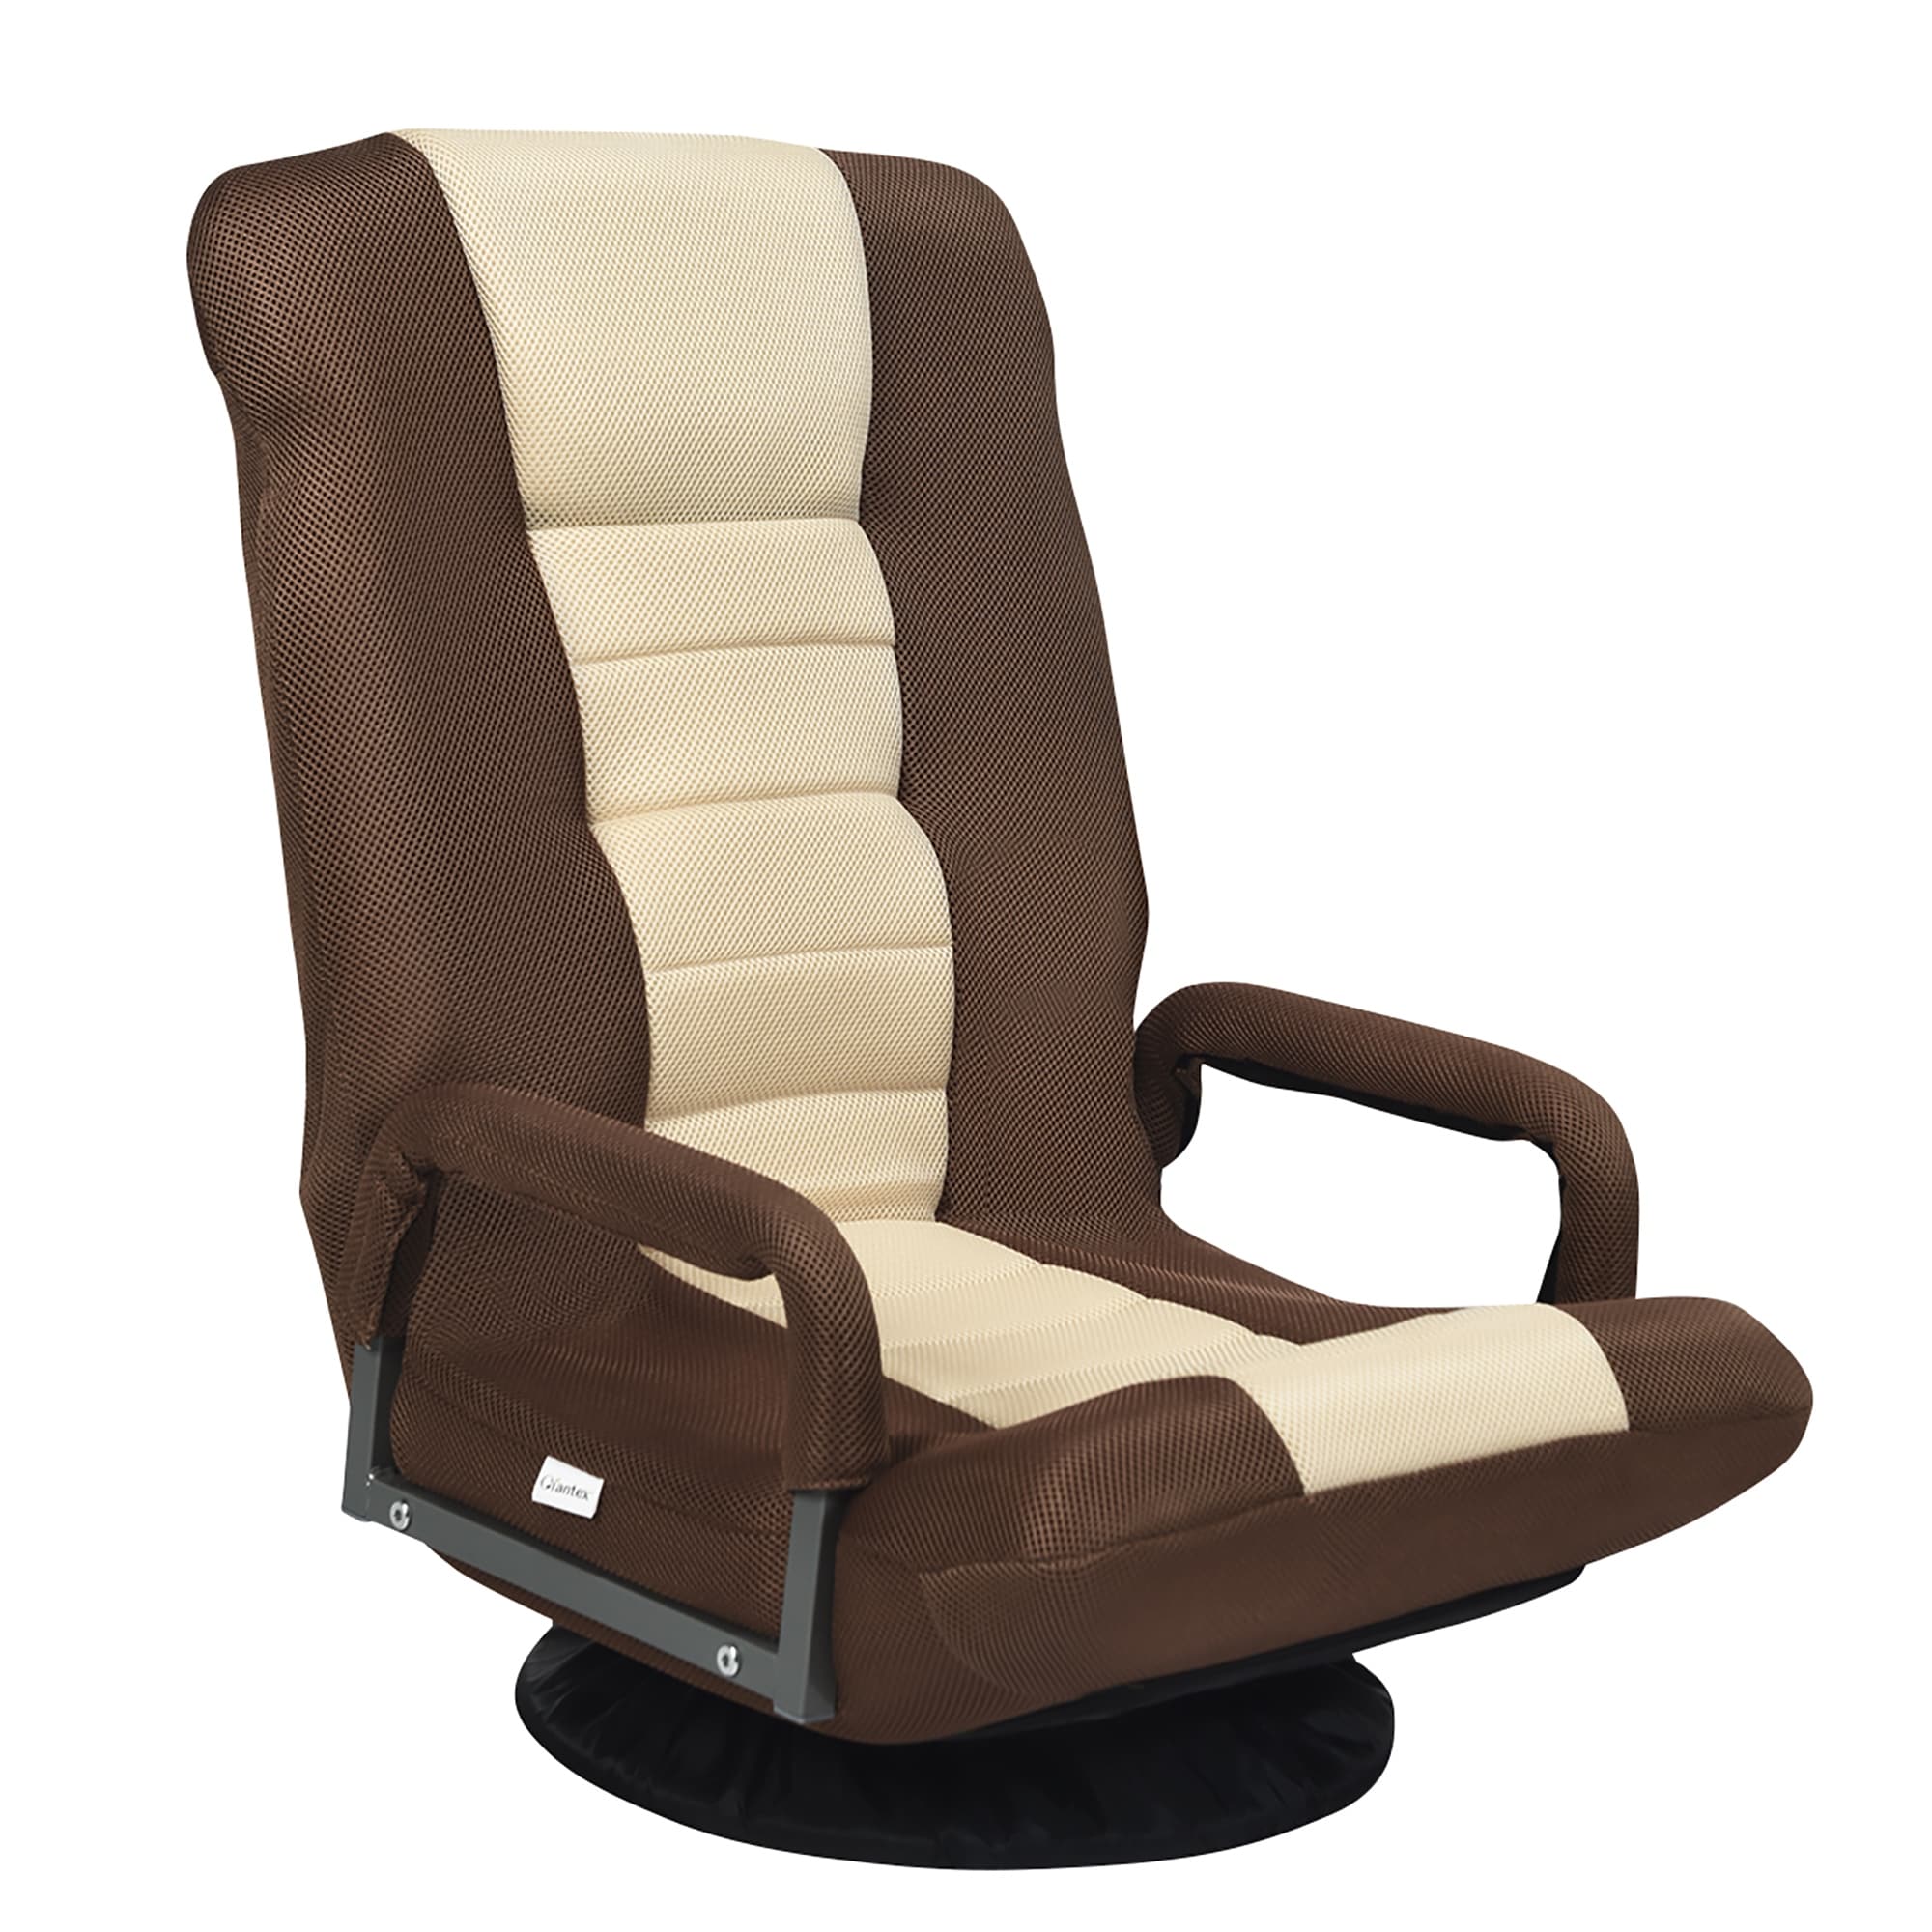 https://ak1.ostkcdn.com/images/products/is/images/direct/2ddc920b32a3370f182aafeea514ef14cc7e557c/360-Degree-Swivel-Gaming-Floor-Chair-with-Foldable-Adjustable-Backrest.jpg